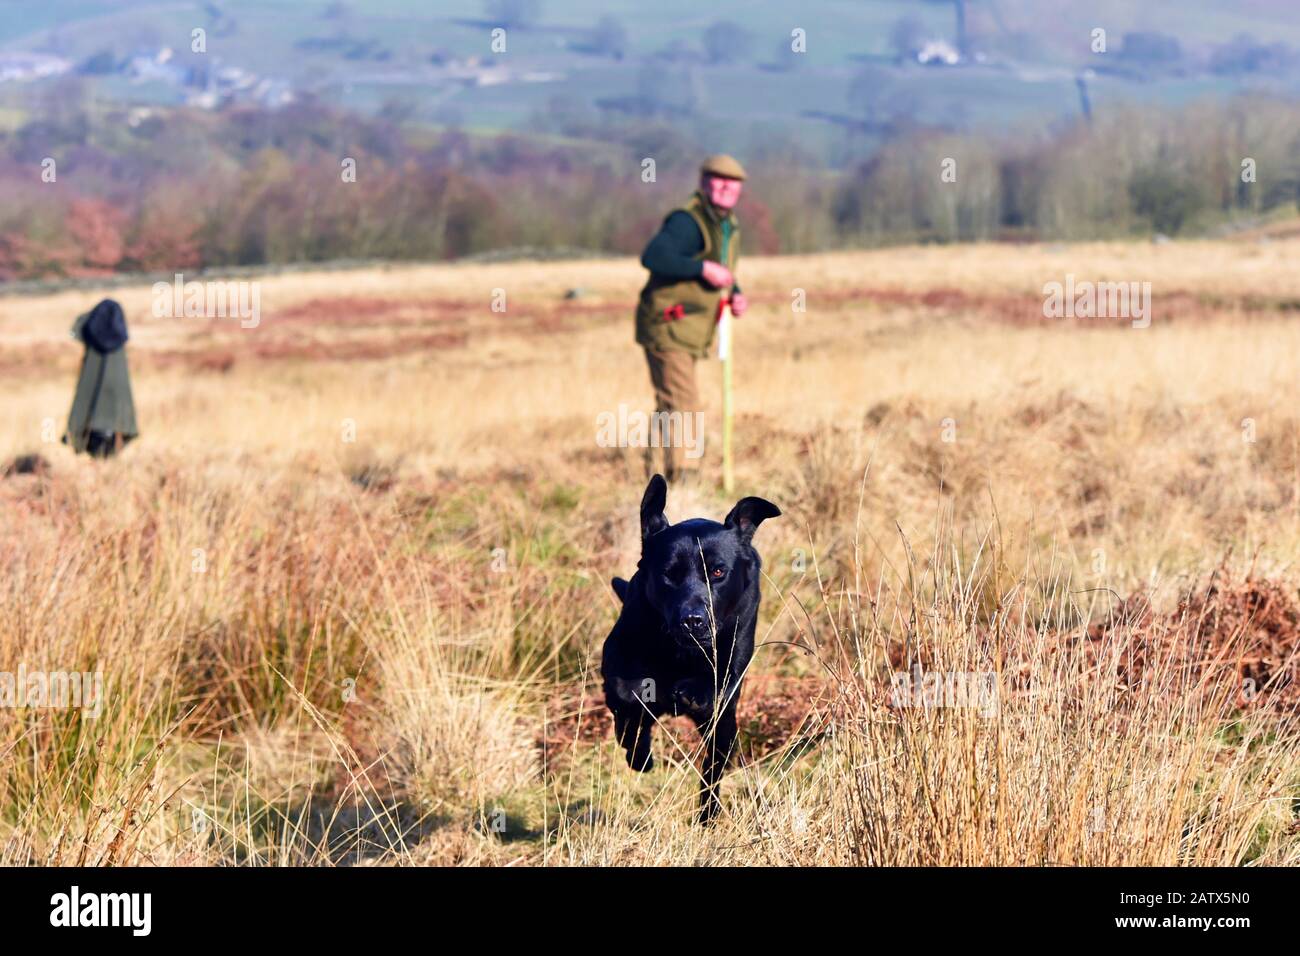 Gun dogs training session Barden Moor Yorkshire Dales UK a gamekeeper trains his dog to fetch a dummy bird. Stock Photo